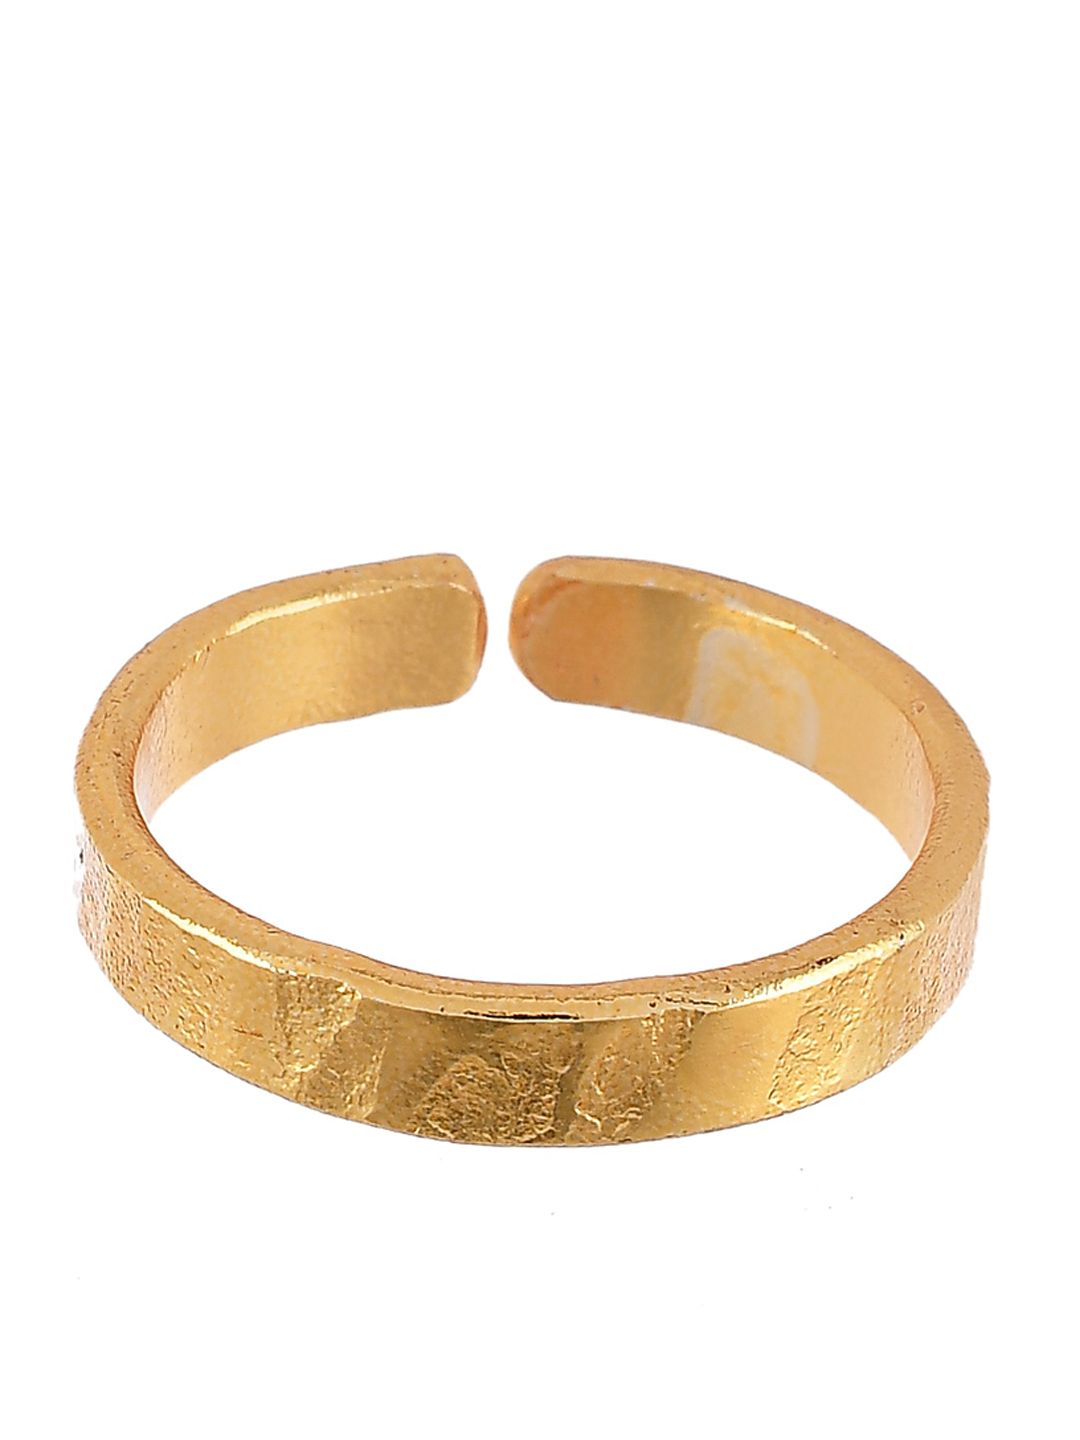 Silvermerc Designs Gold-Plated Handmade Flat Ring Price in India